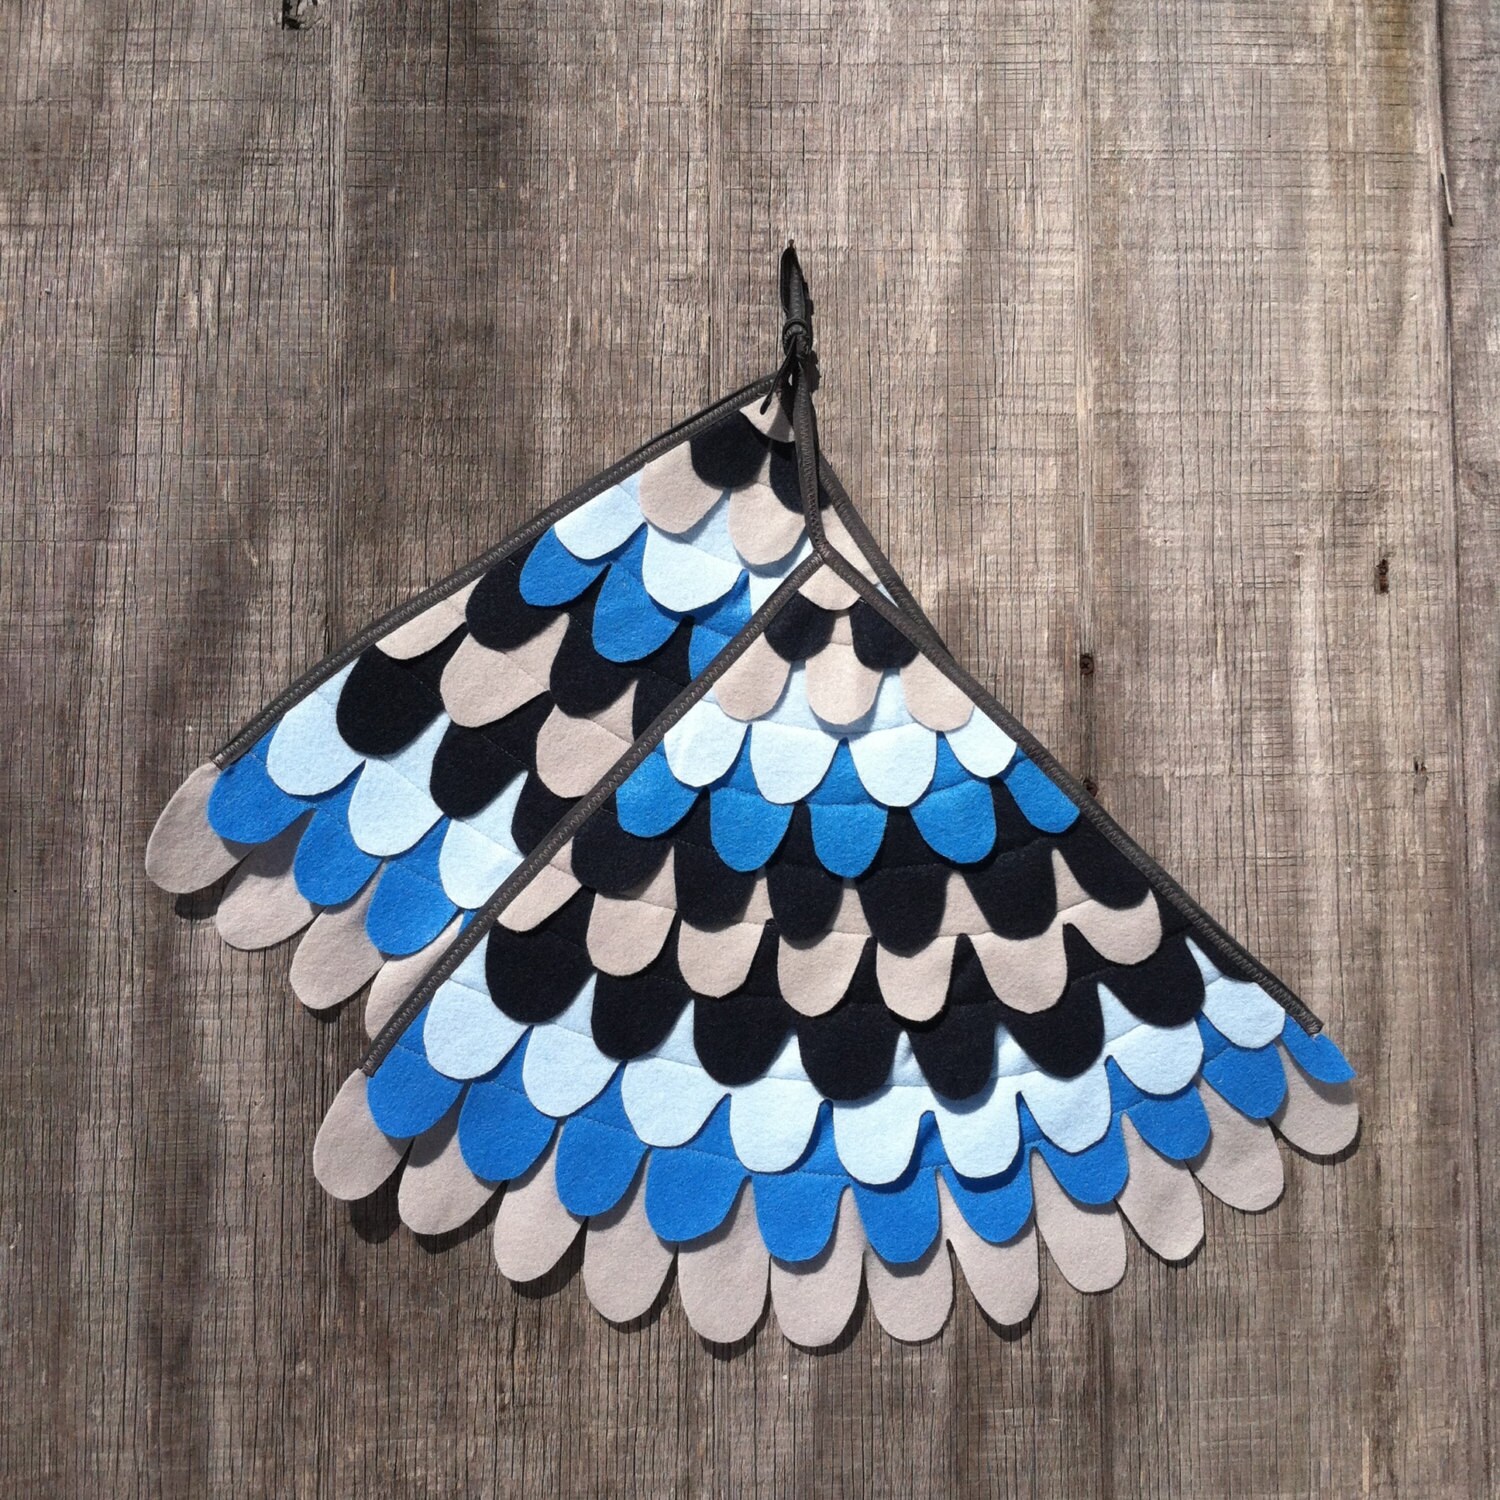 Costume Wings, Blue Jay Wings, Magical Creature Costume, Made from Recycled Plastic Bottles